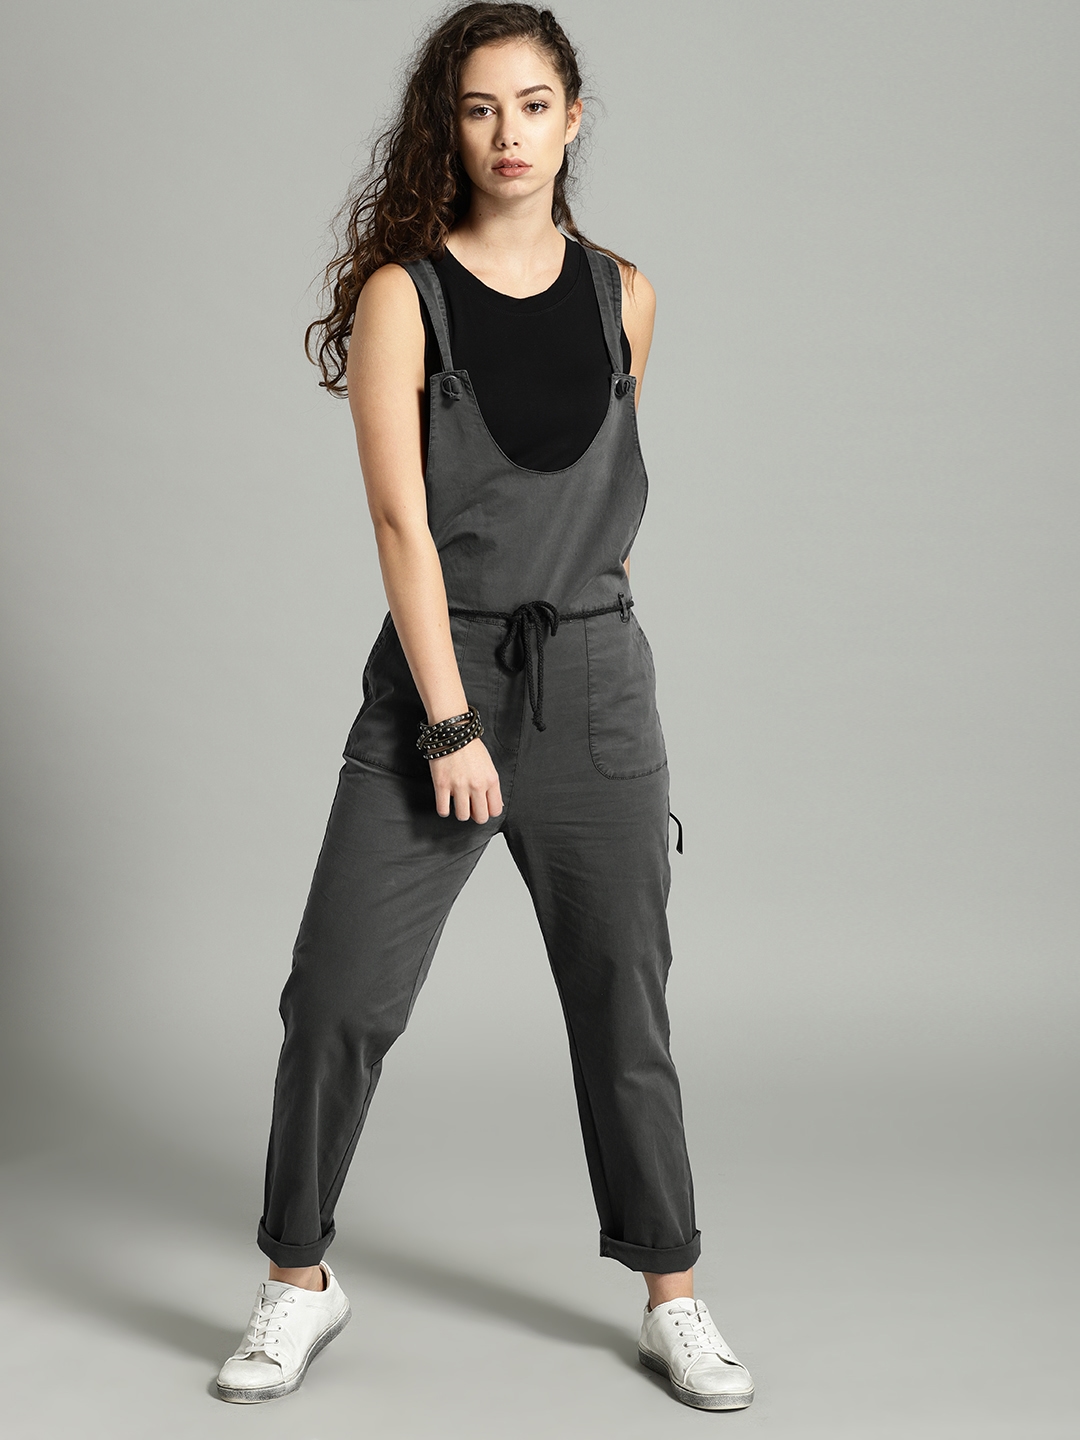 Roadster Women Charcoal Grey Dungarees 